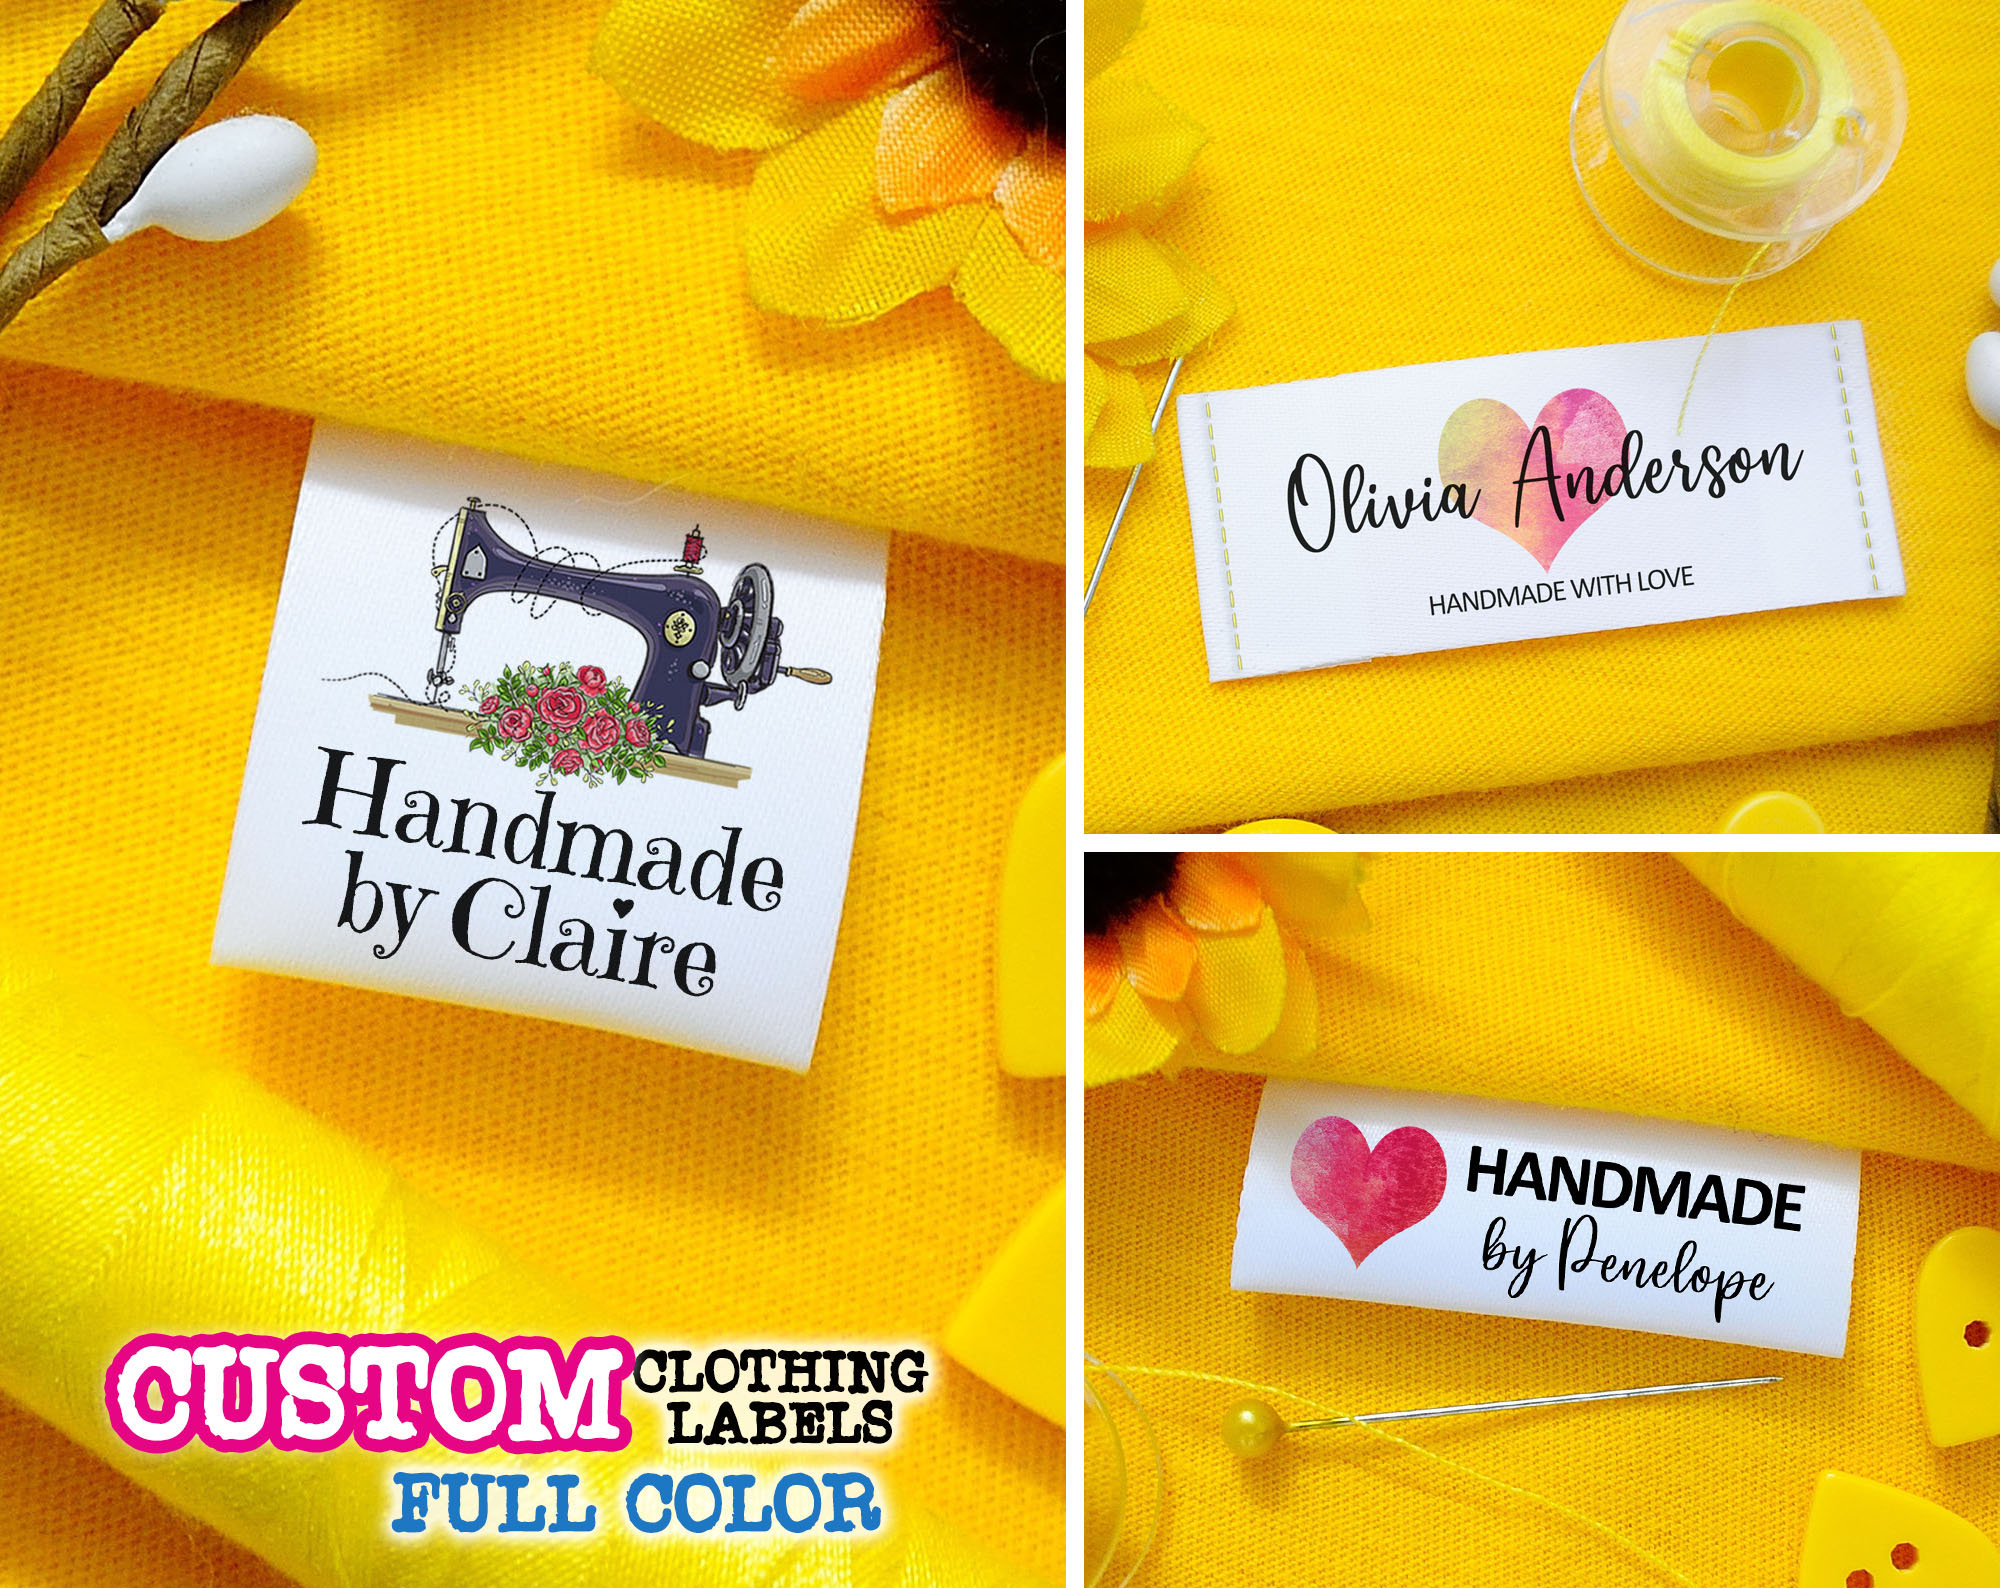 Custom Clothing Tags, Handmade Tag, Product Label, Business